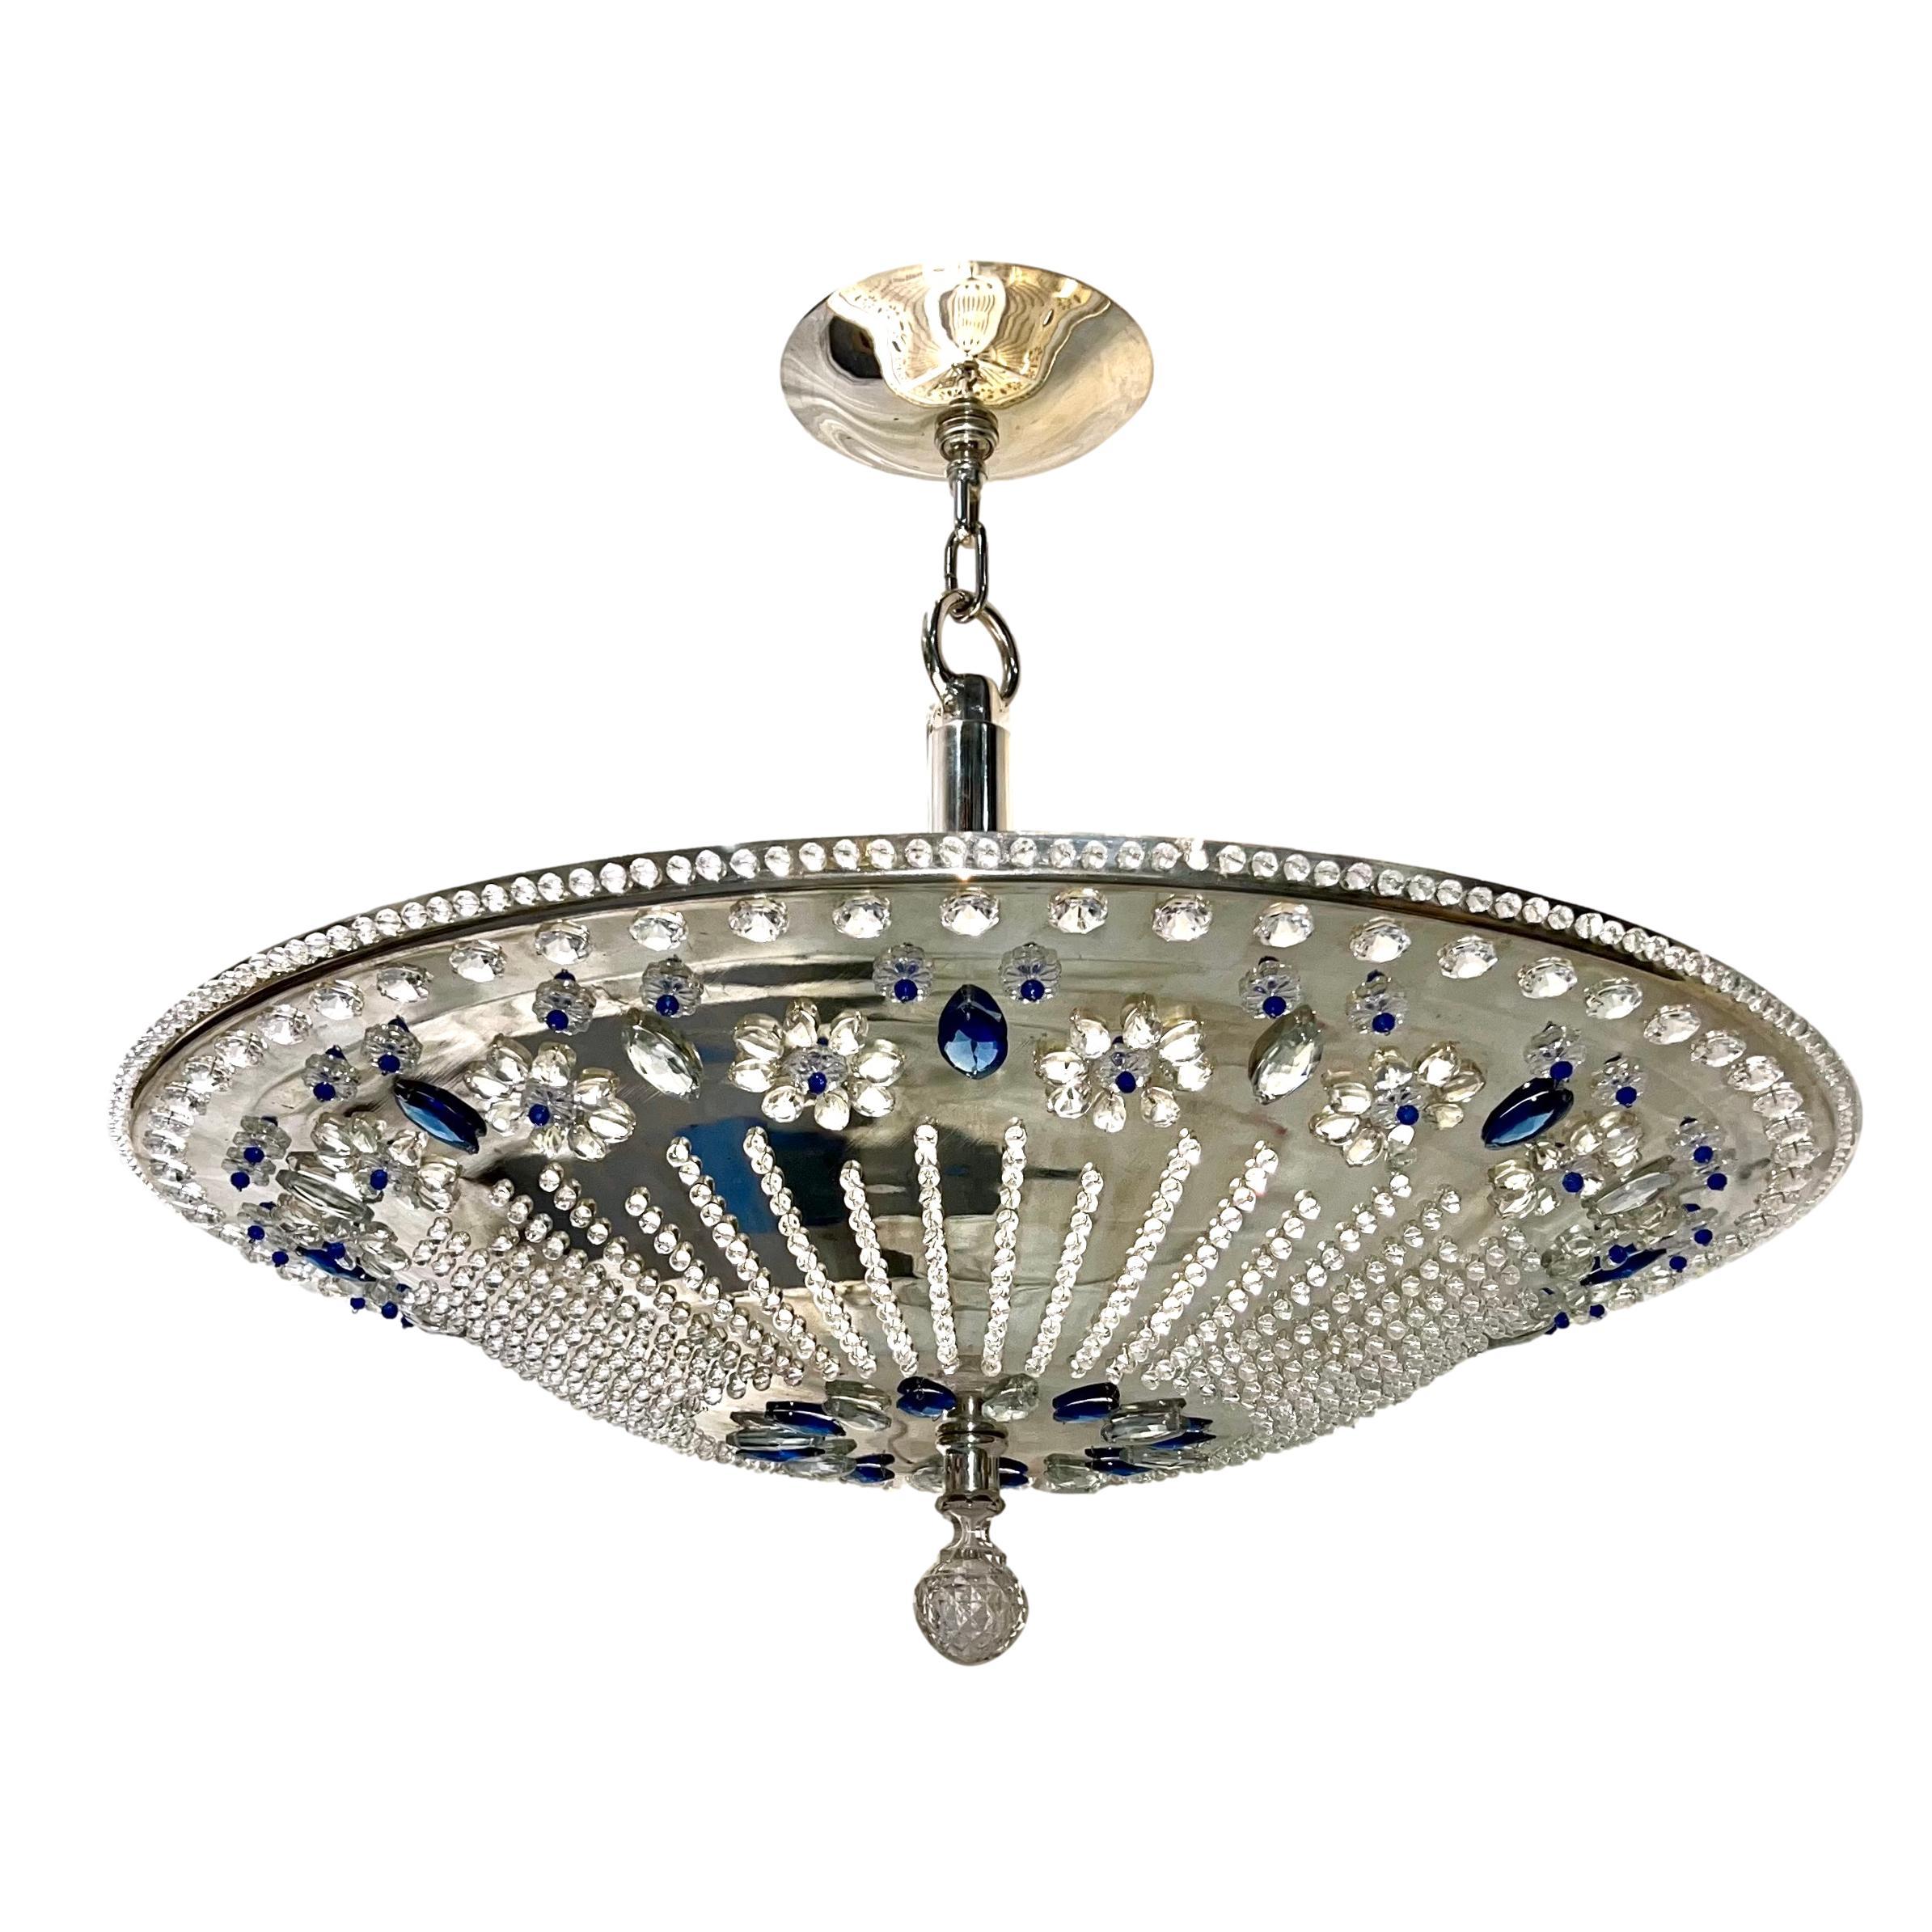 A late 1960's French silver plated light fixture with blue and clear crystal insets and eight interior Edison lights.

Measurements:
Drop: 31